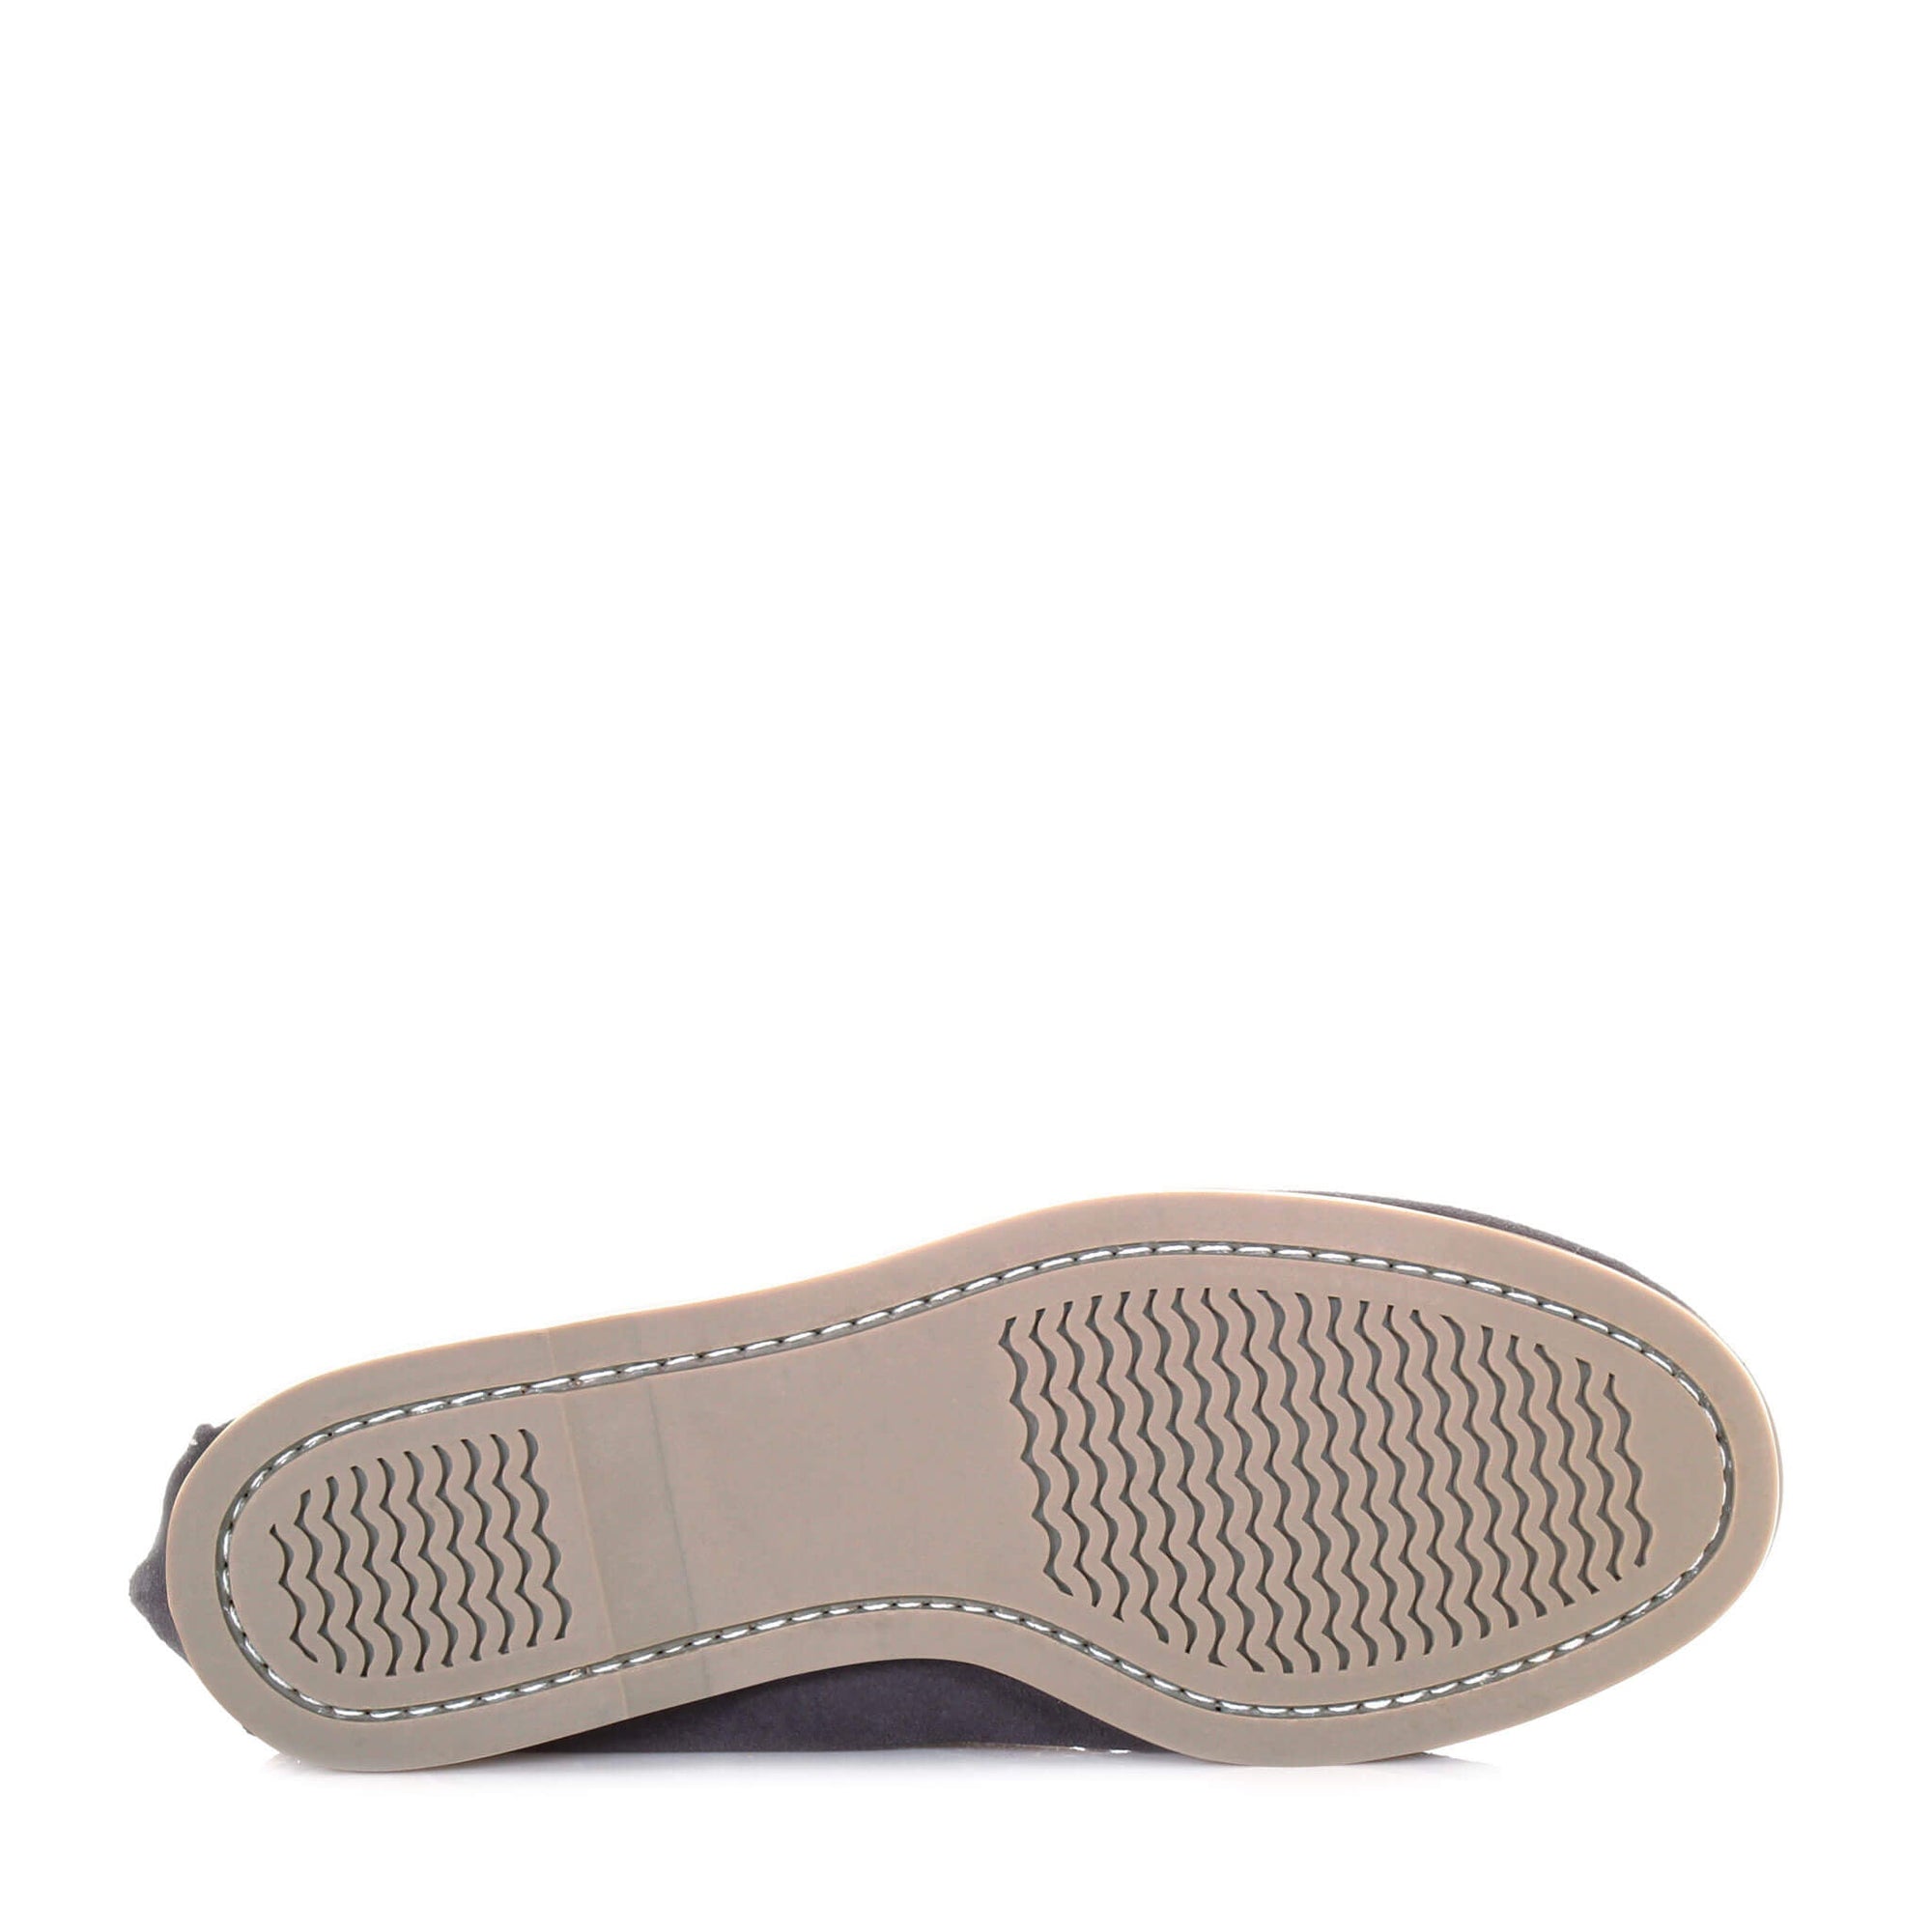 Canada Mocc Grey Moccasin for Women